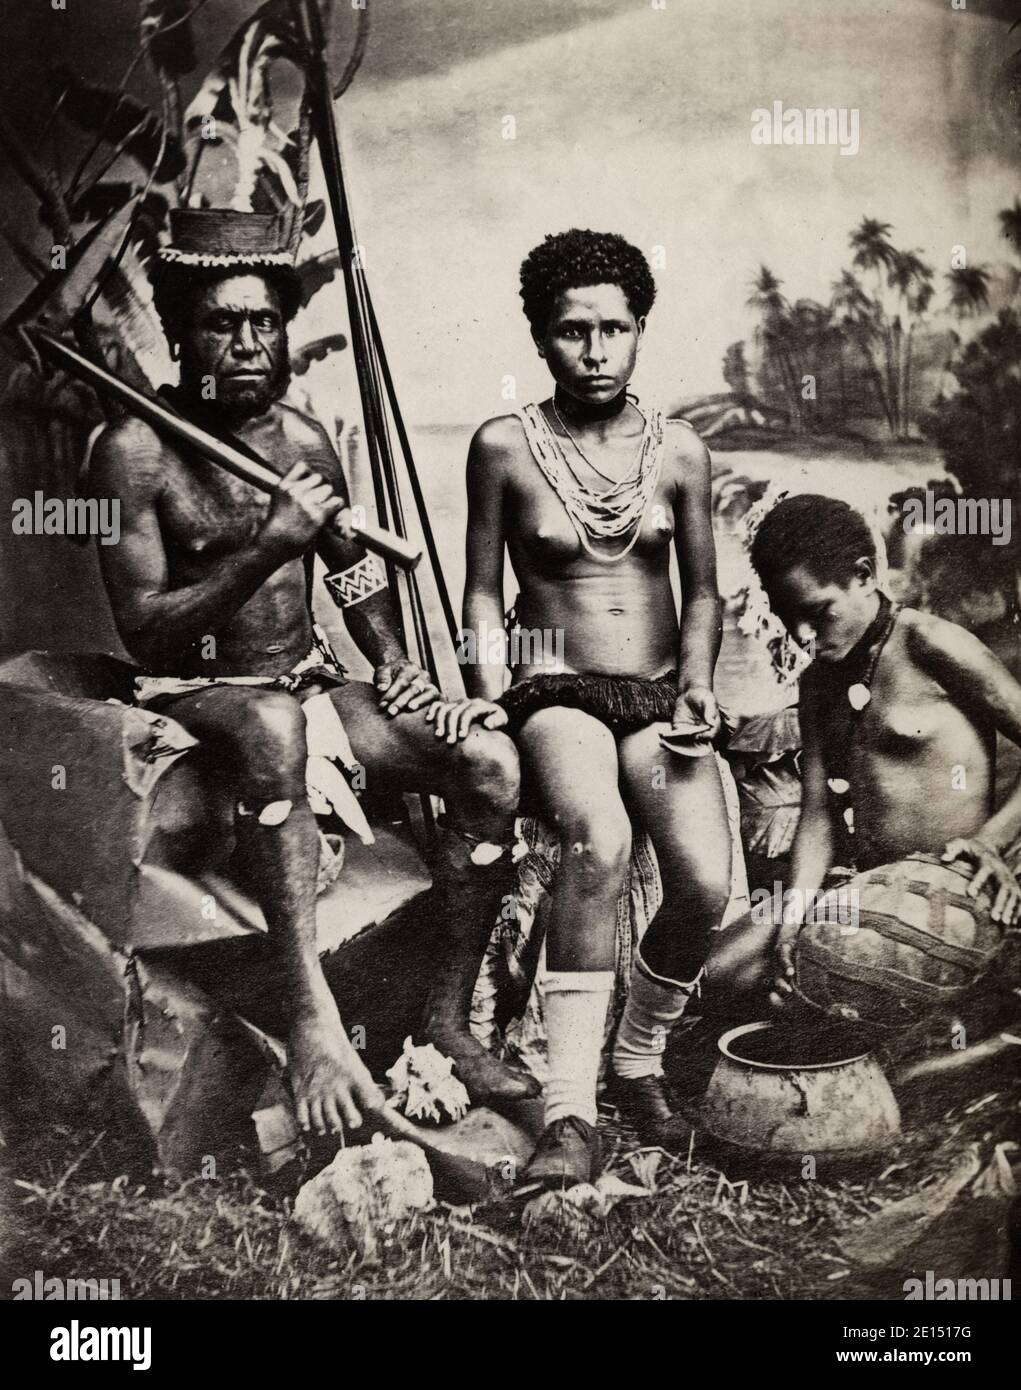 Vintage 19th century photograph - Oceania, Pacific Islands, probably Fiji,  Tahiti or Western Samoa: man with club (and his wives Stock Photo - Alamy